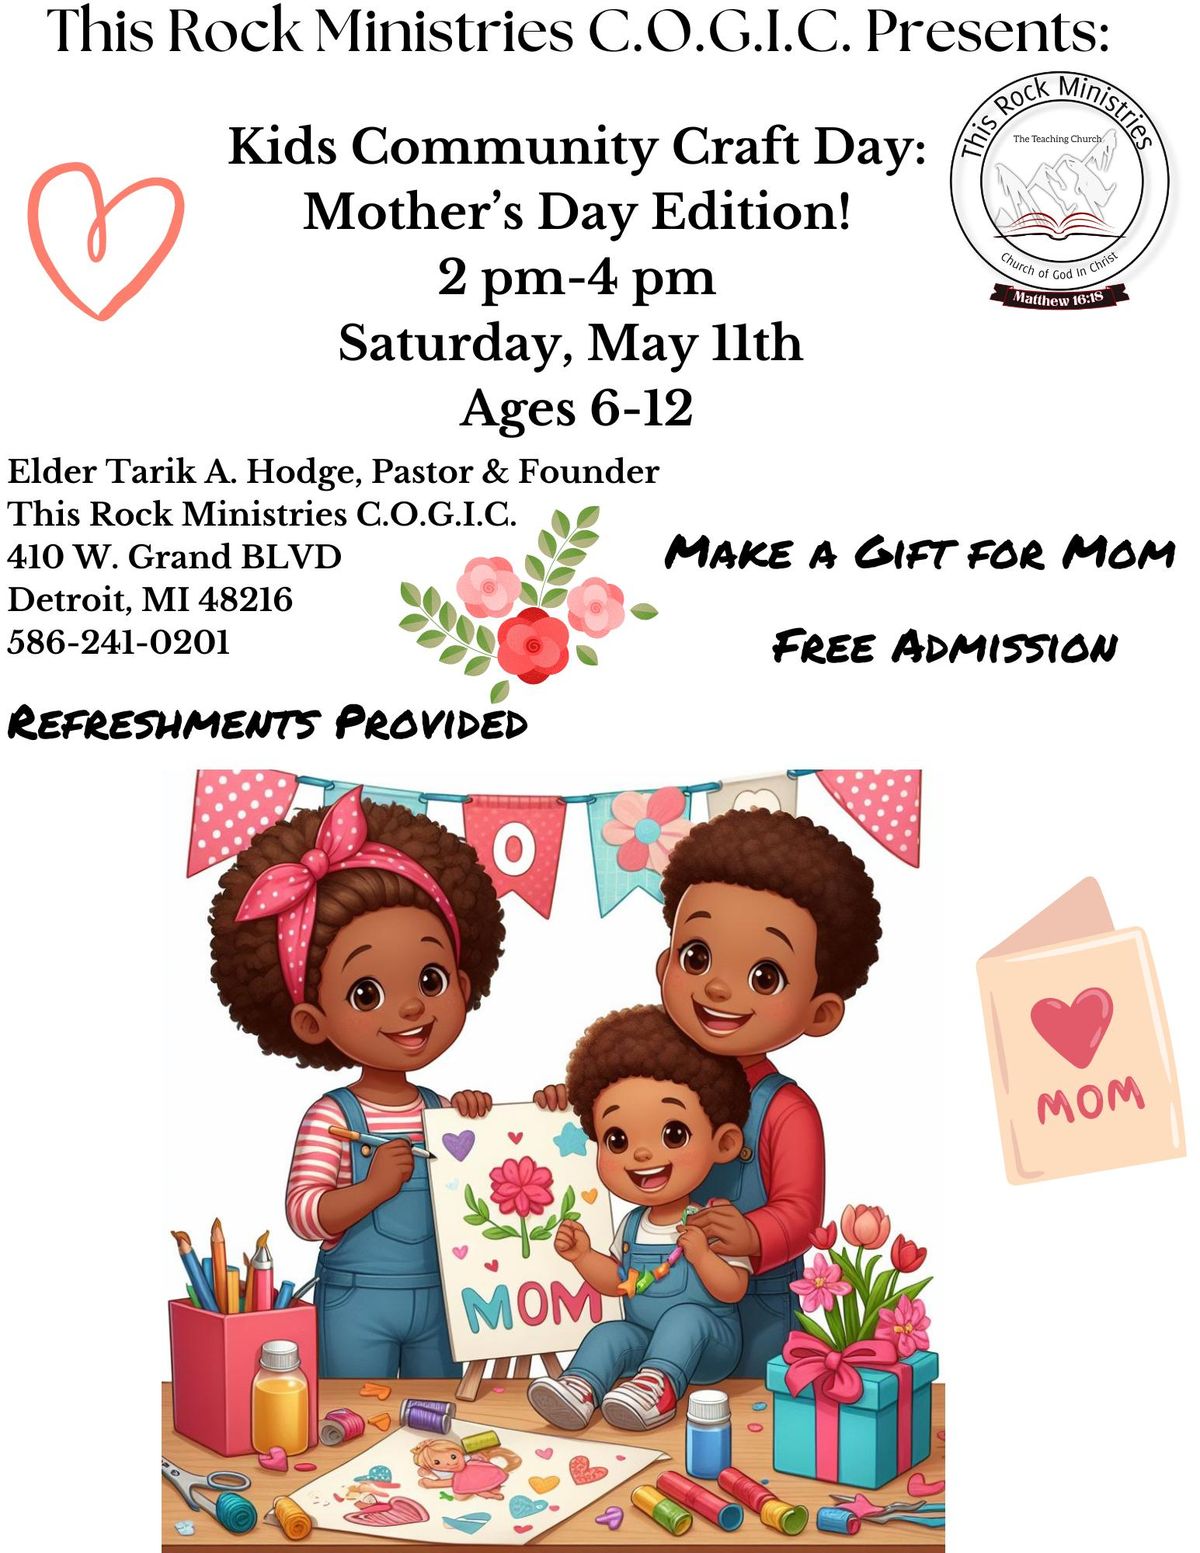 Kid's Community Craft Day: Mother's Day Edition!